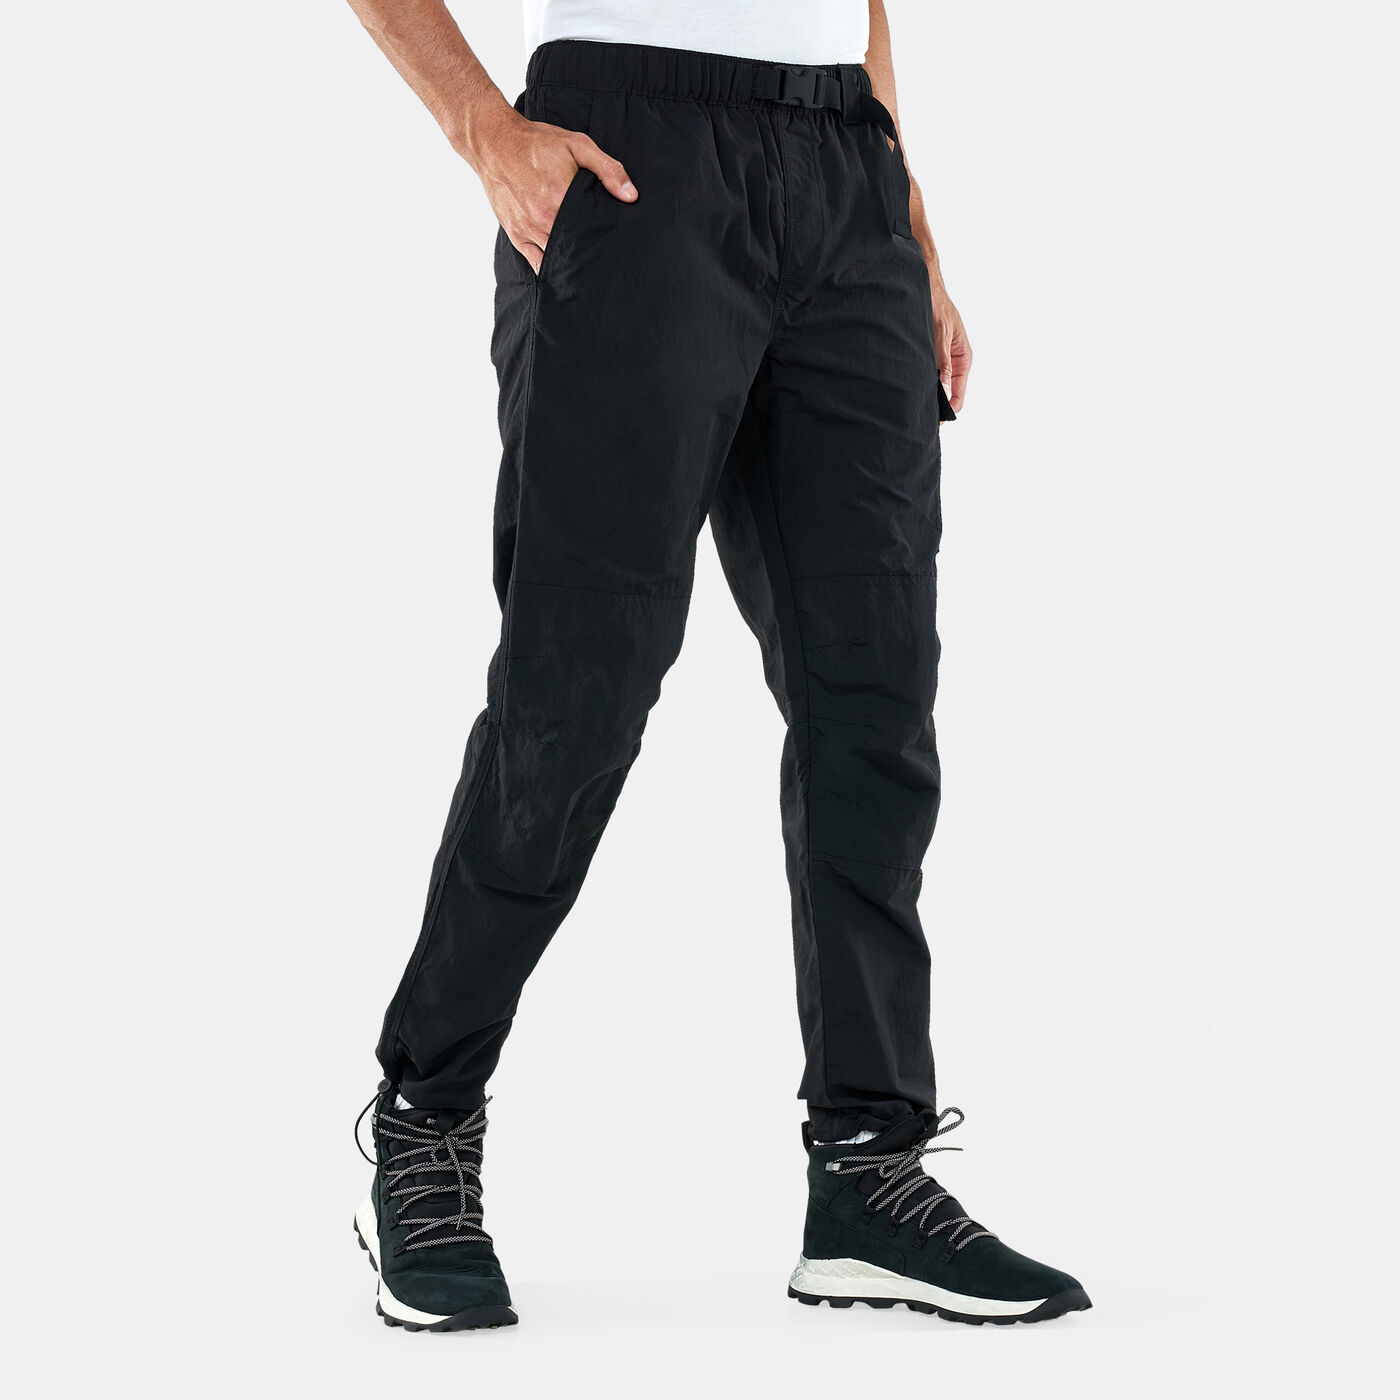 Men’s Outdoor Archive Climbing Joggers